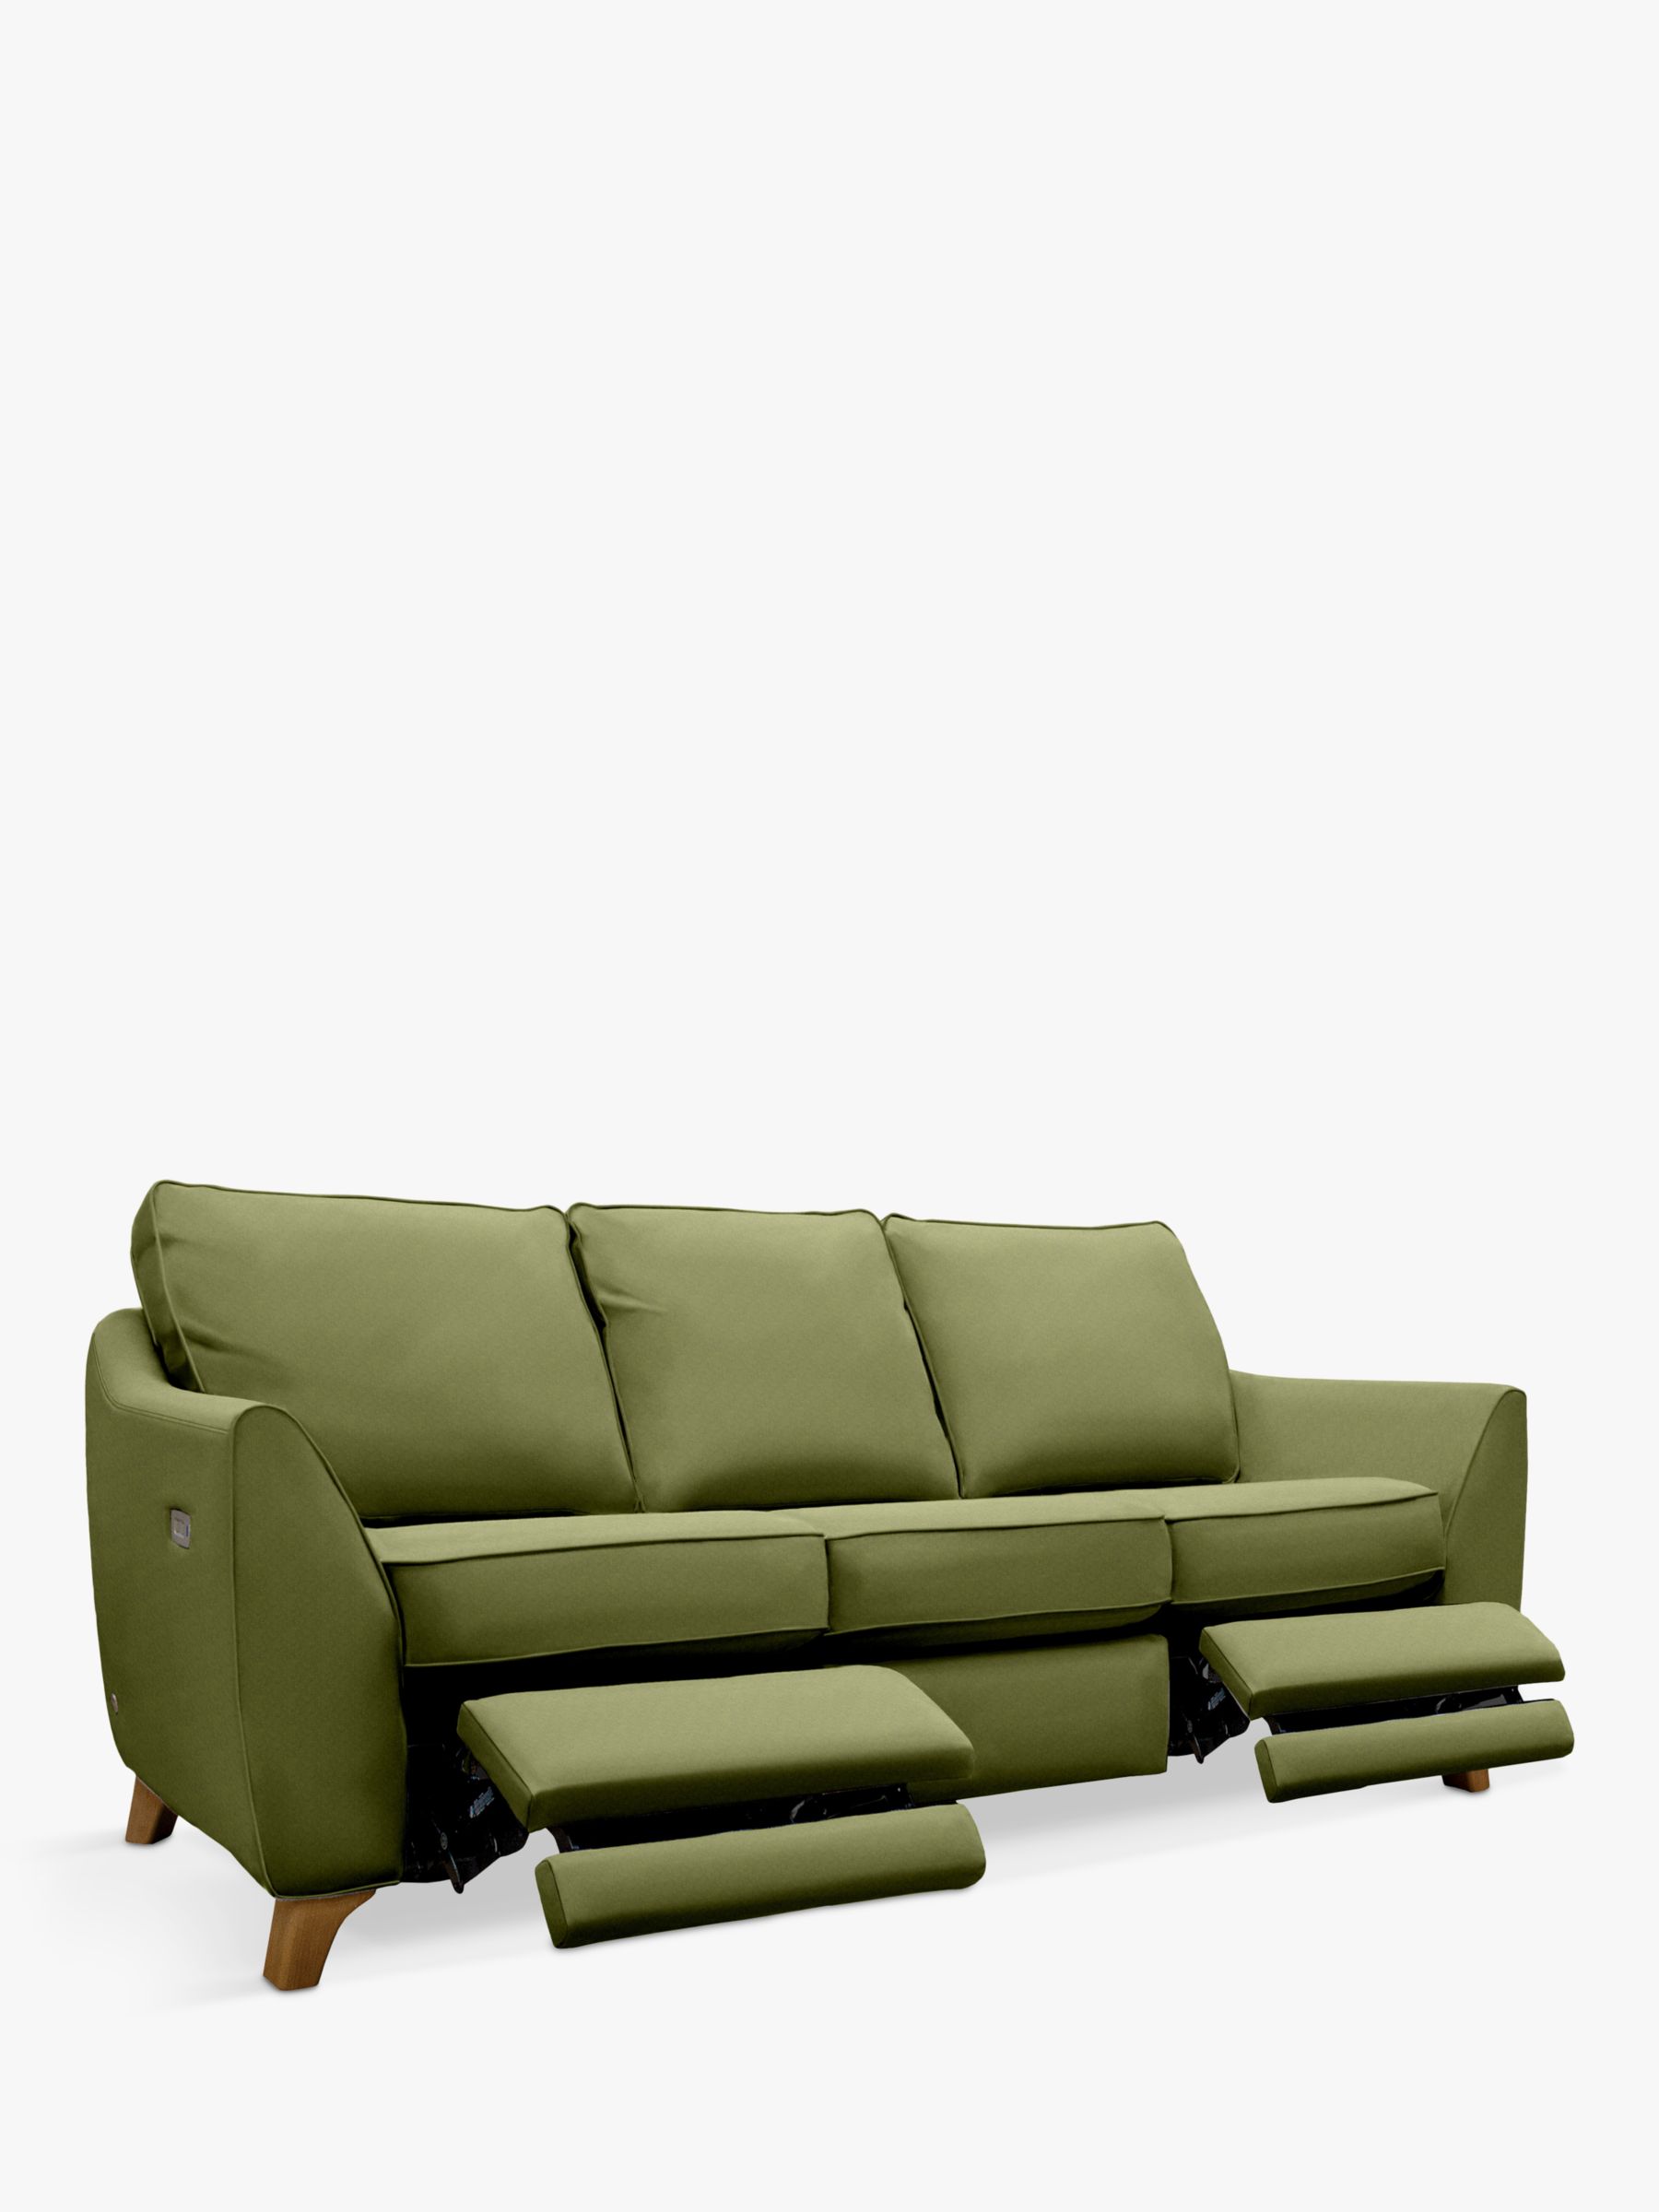 The Sixty Eight Range, G Plan Vintage The Sixty Eight Large 3 Seater Sofa with Double Footrest Mechanism, Marl Green